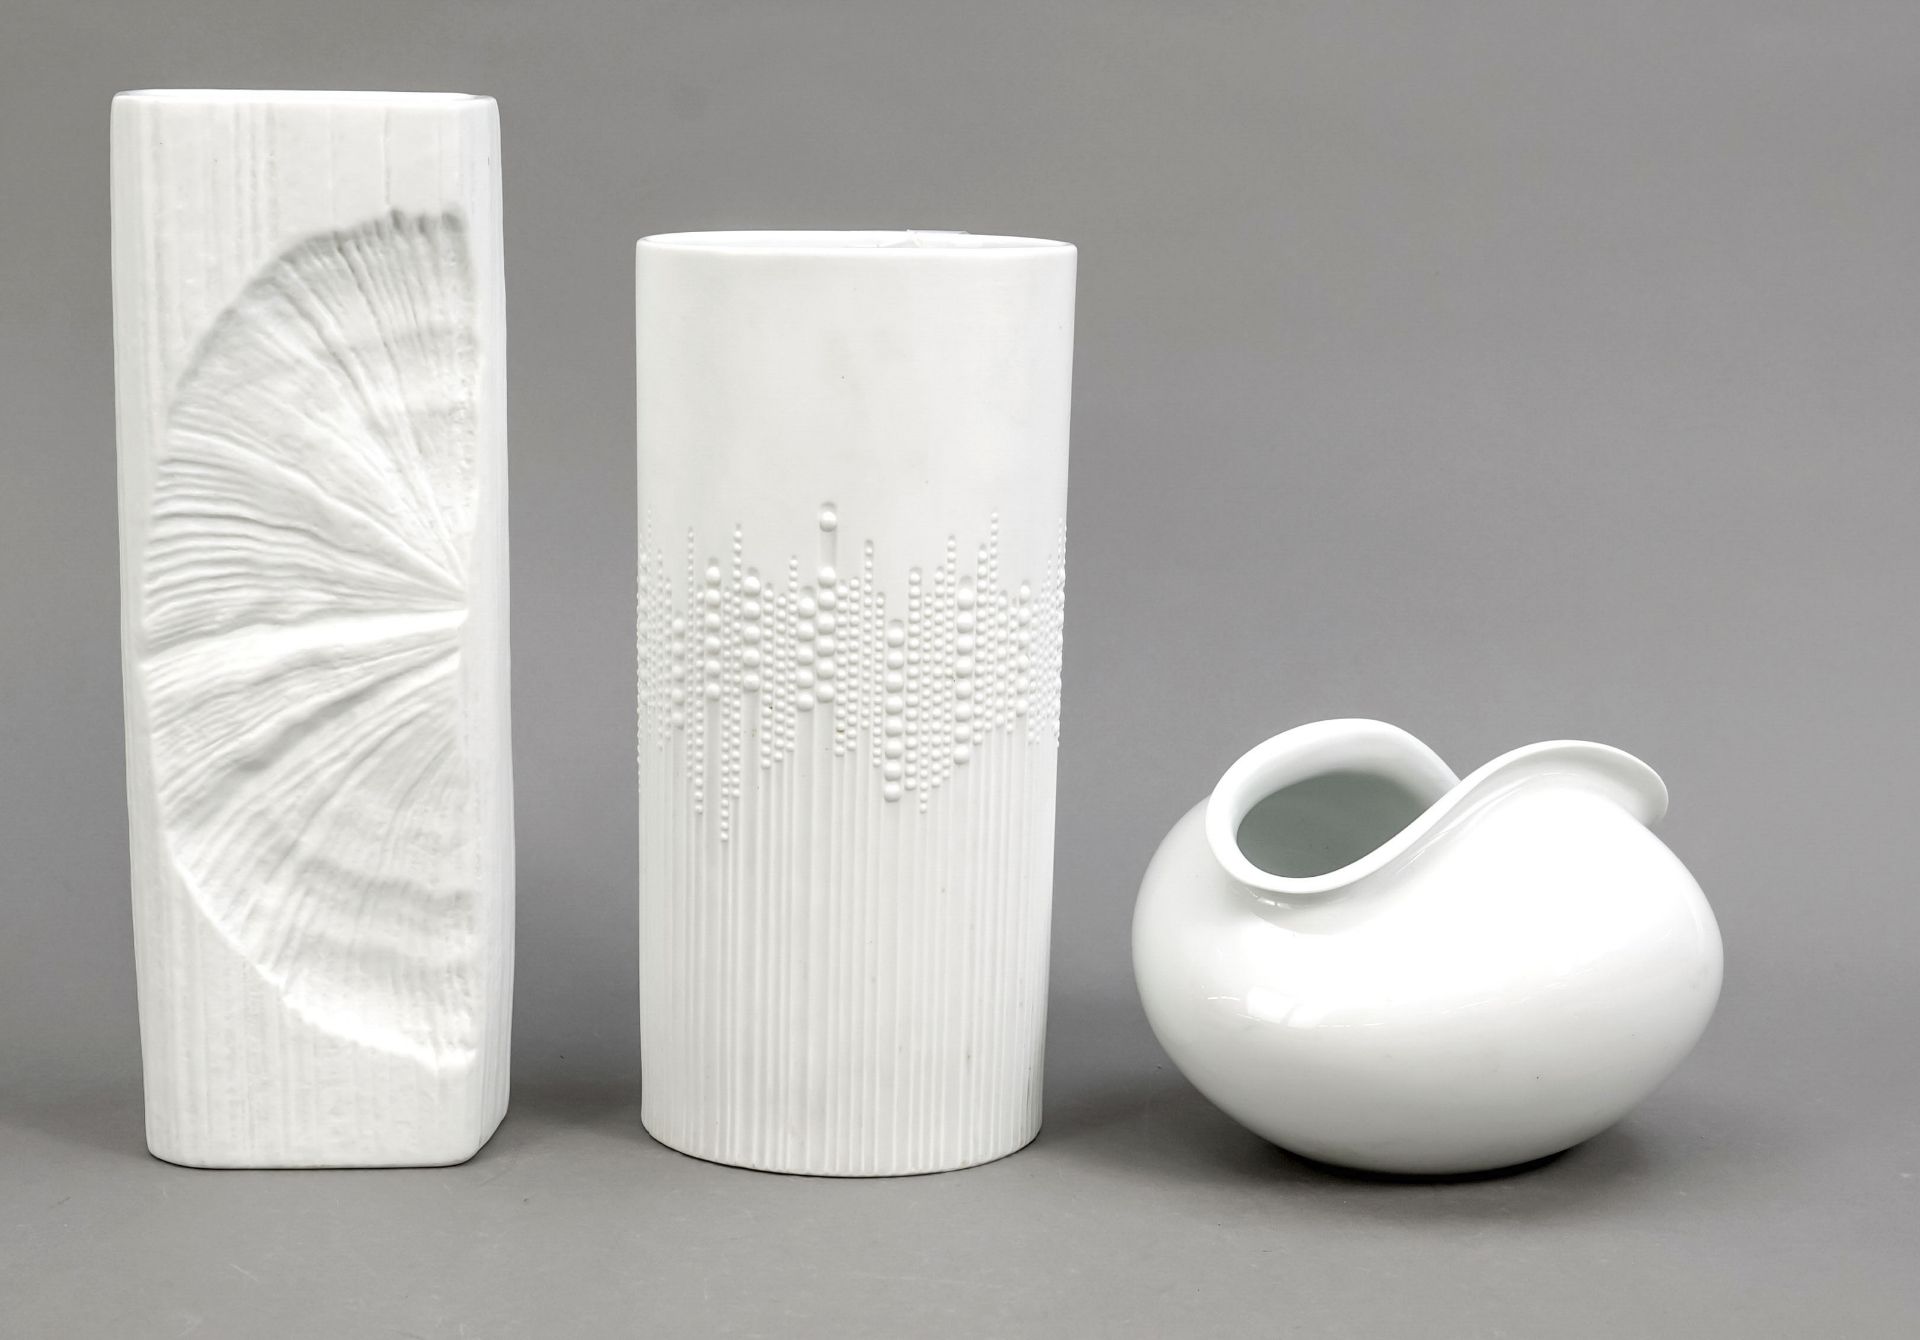 Three vases, Rosenthal, Studio-Line, after 1969, white, 2 high vases with strucrrelief, h. 24 and